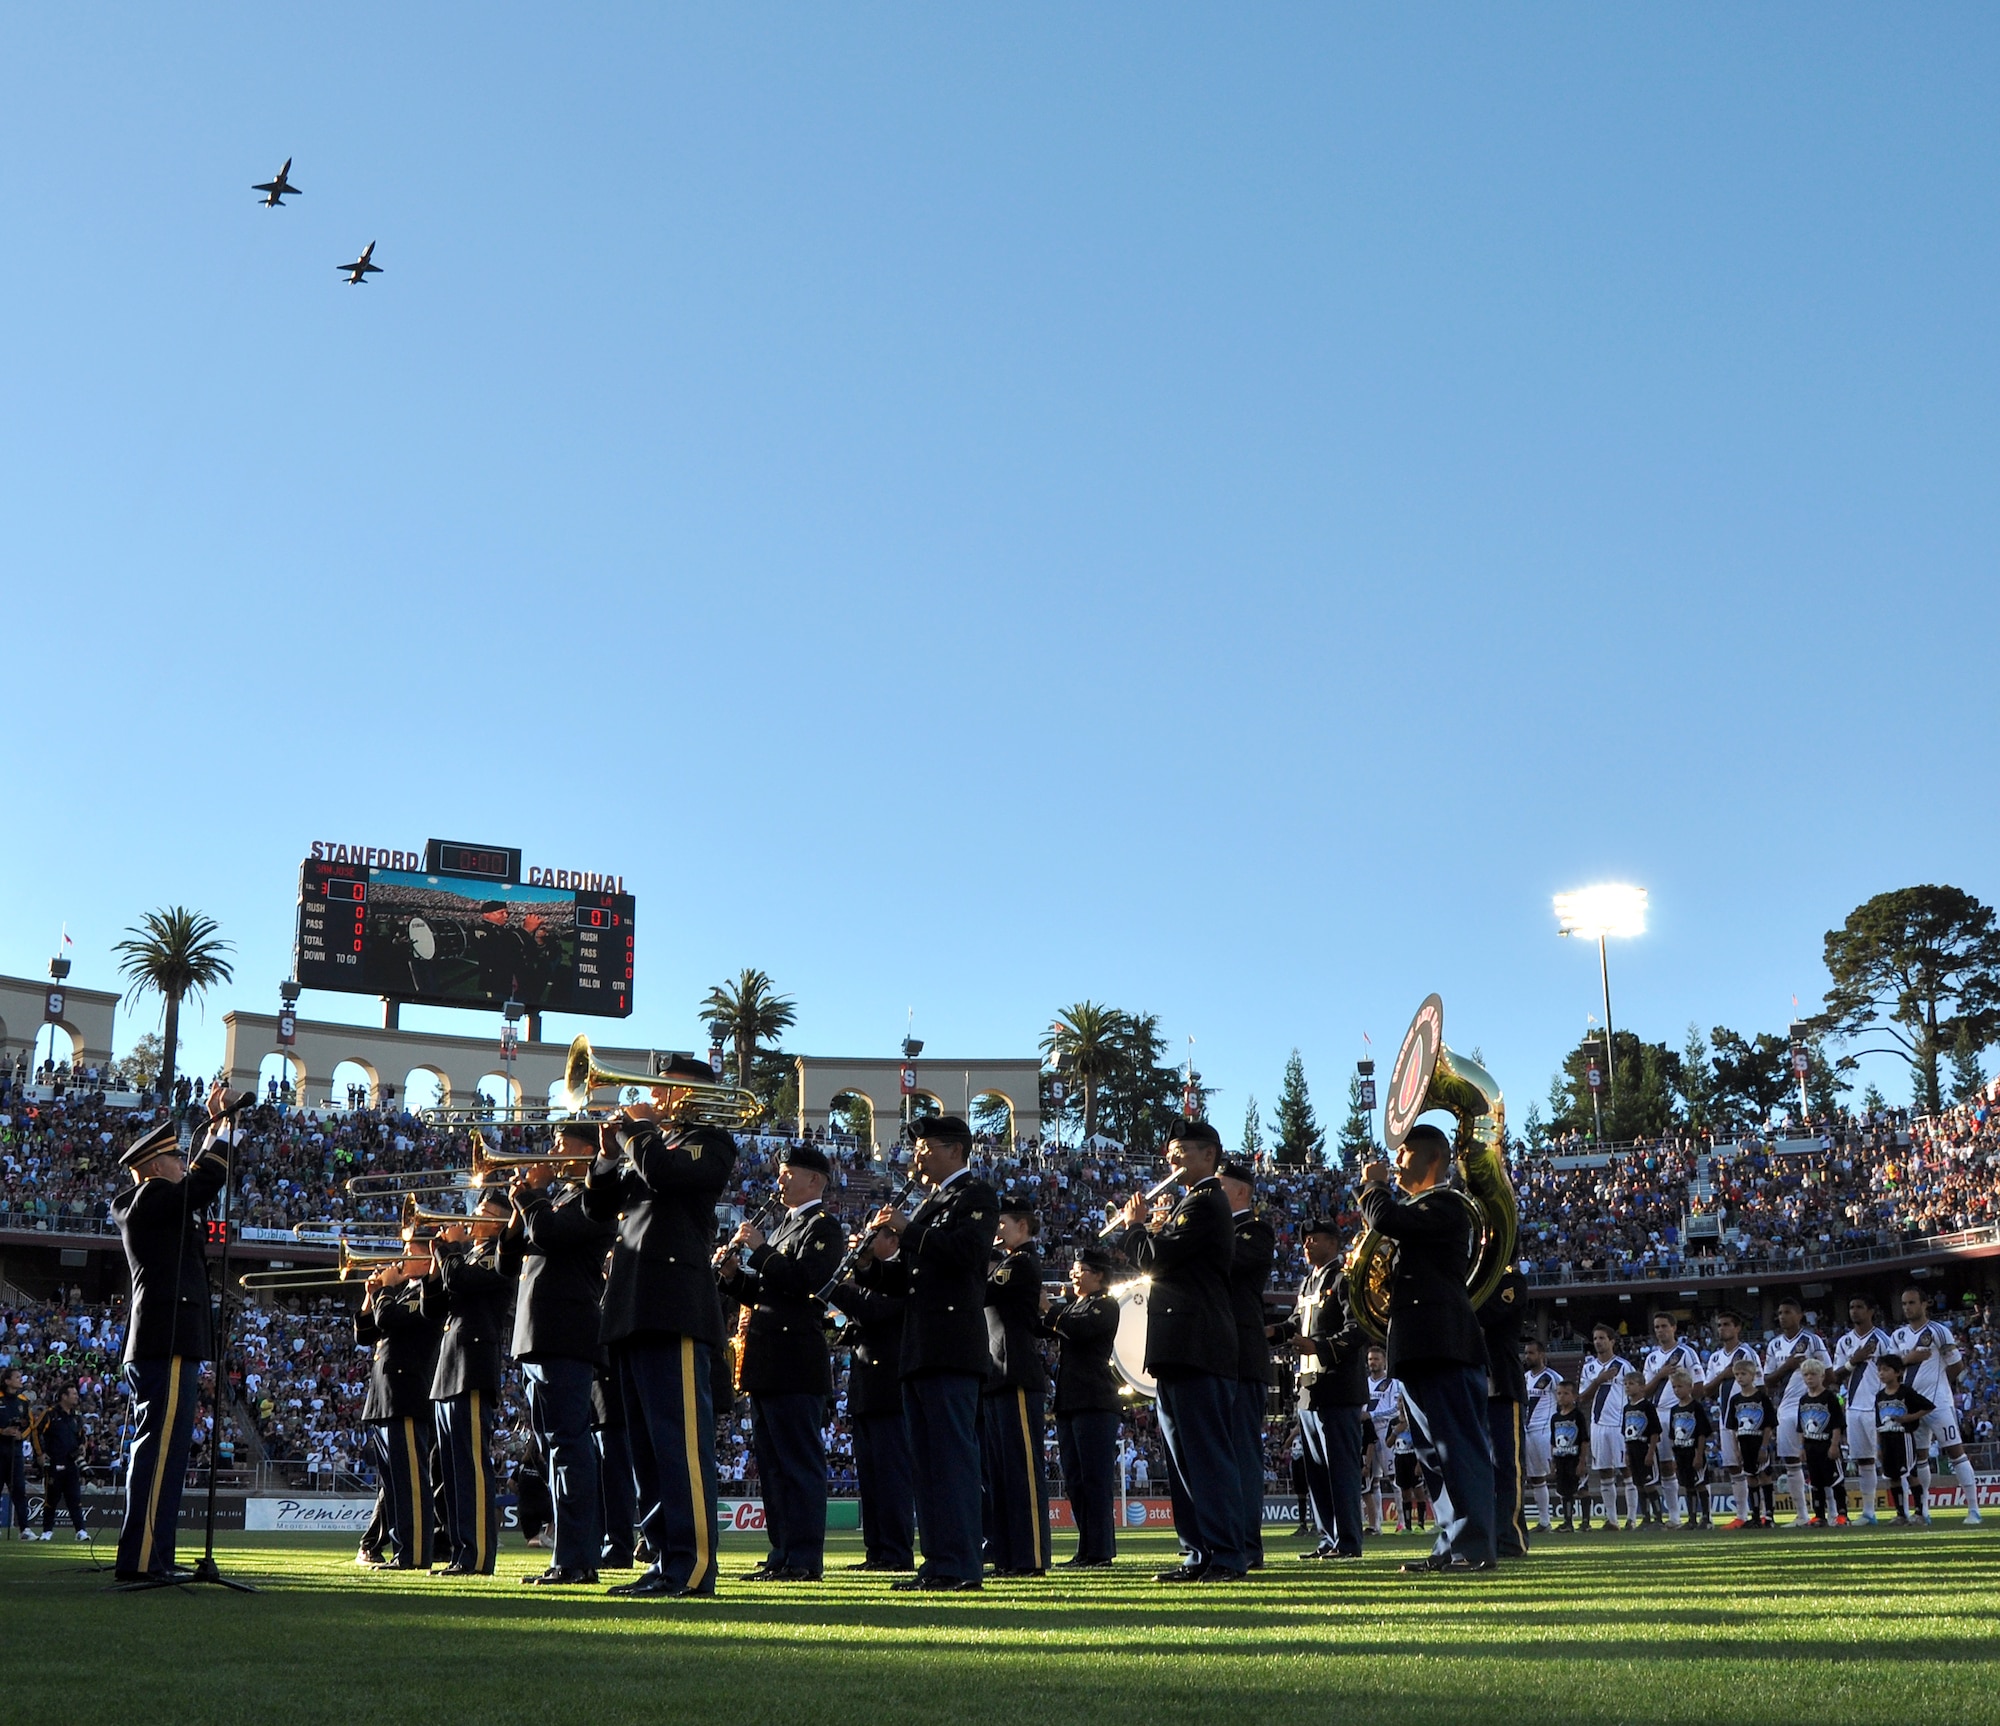 The 300th U.S. Army Reserve Band plays the national anthem as U.S. Air Force T-38 trainer jets fly-over the opening ceremonies of the L.A. Galaxy versus San Jose Earthquakes game at Stanford Stadium, Stanford, Calif., June 30, 2012. The Air Force jets flew from Beale Air Force Base, Calif., to provide the fly-over. (U.S. Air Force photo by Staff Sgt. Robert M. Trujillo/Released)